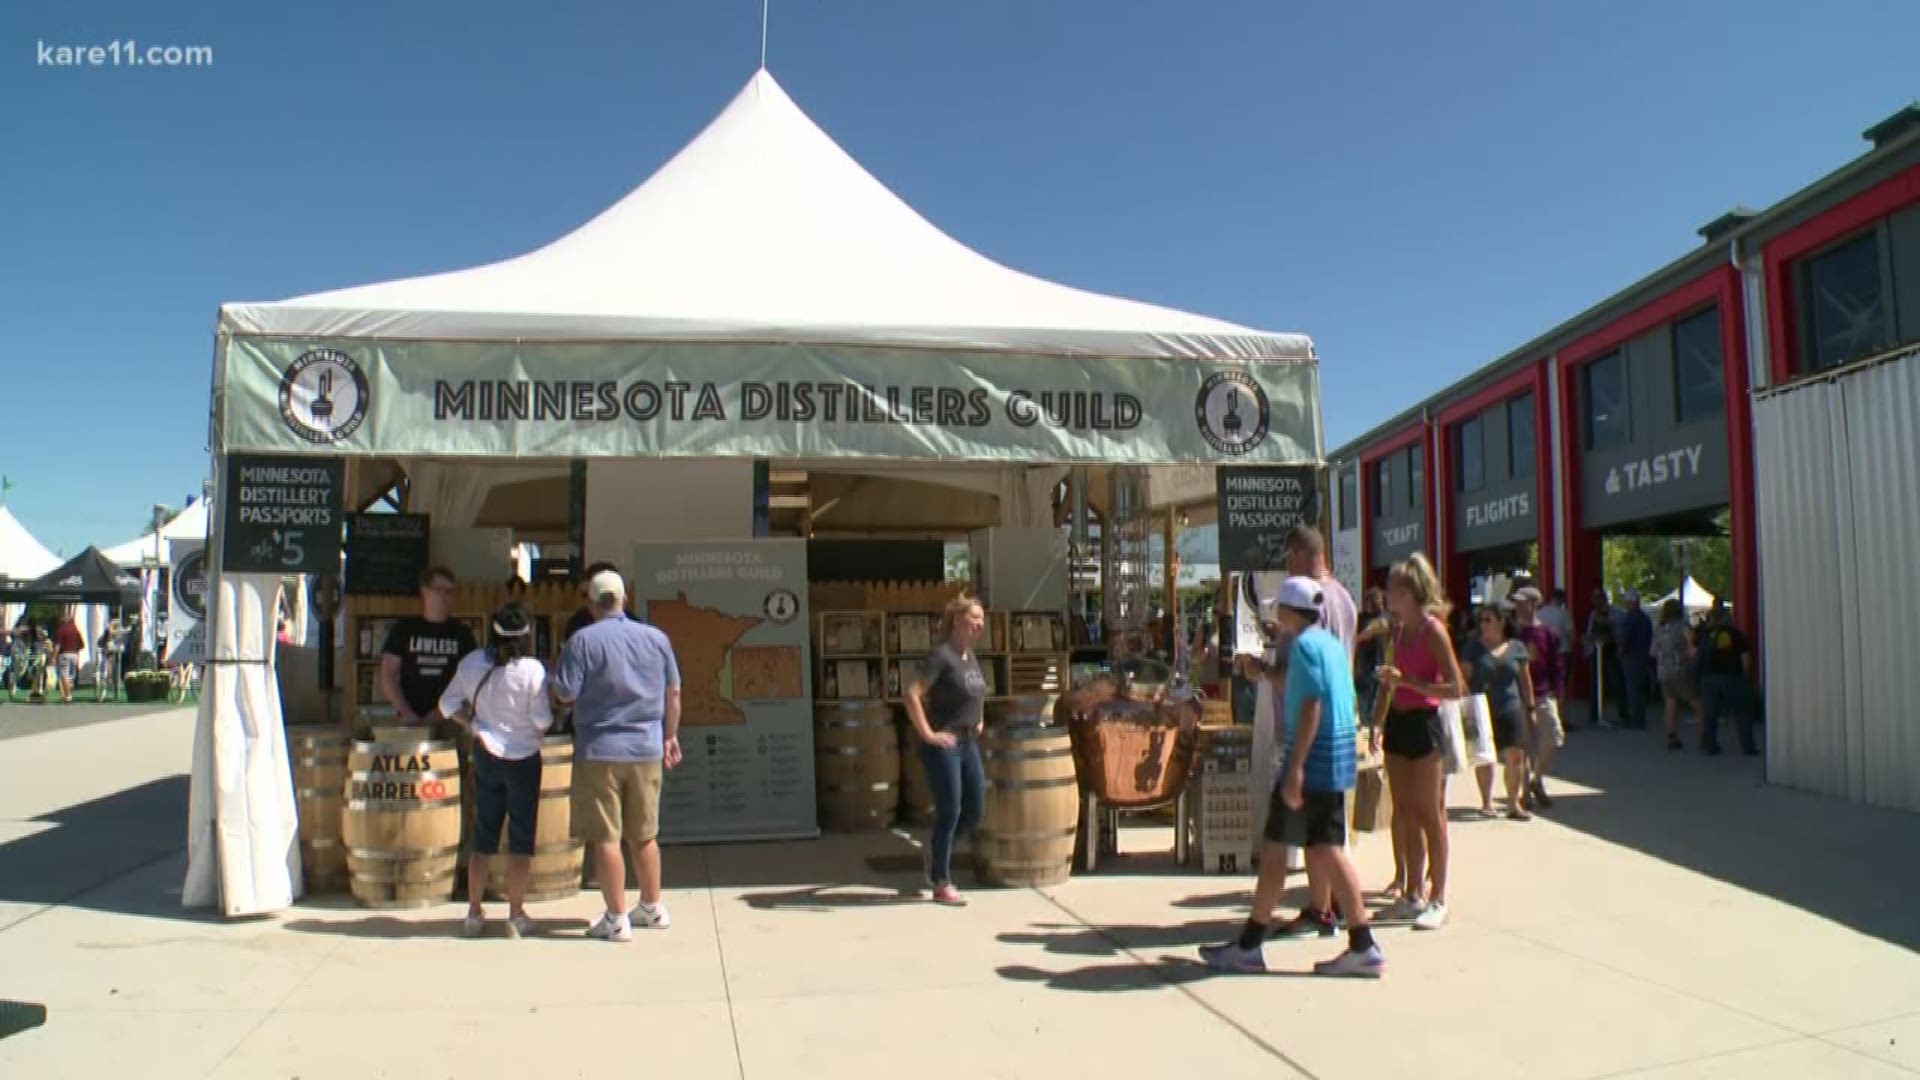 The Minnesota Distillers Guild booth can be found at the North End of the fair, next to The Hangar.